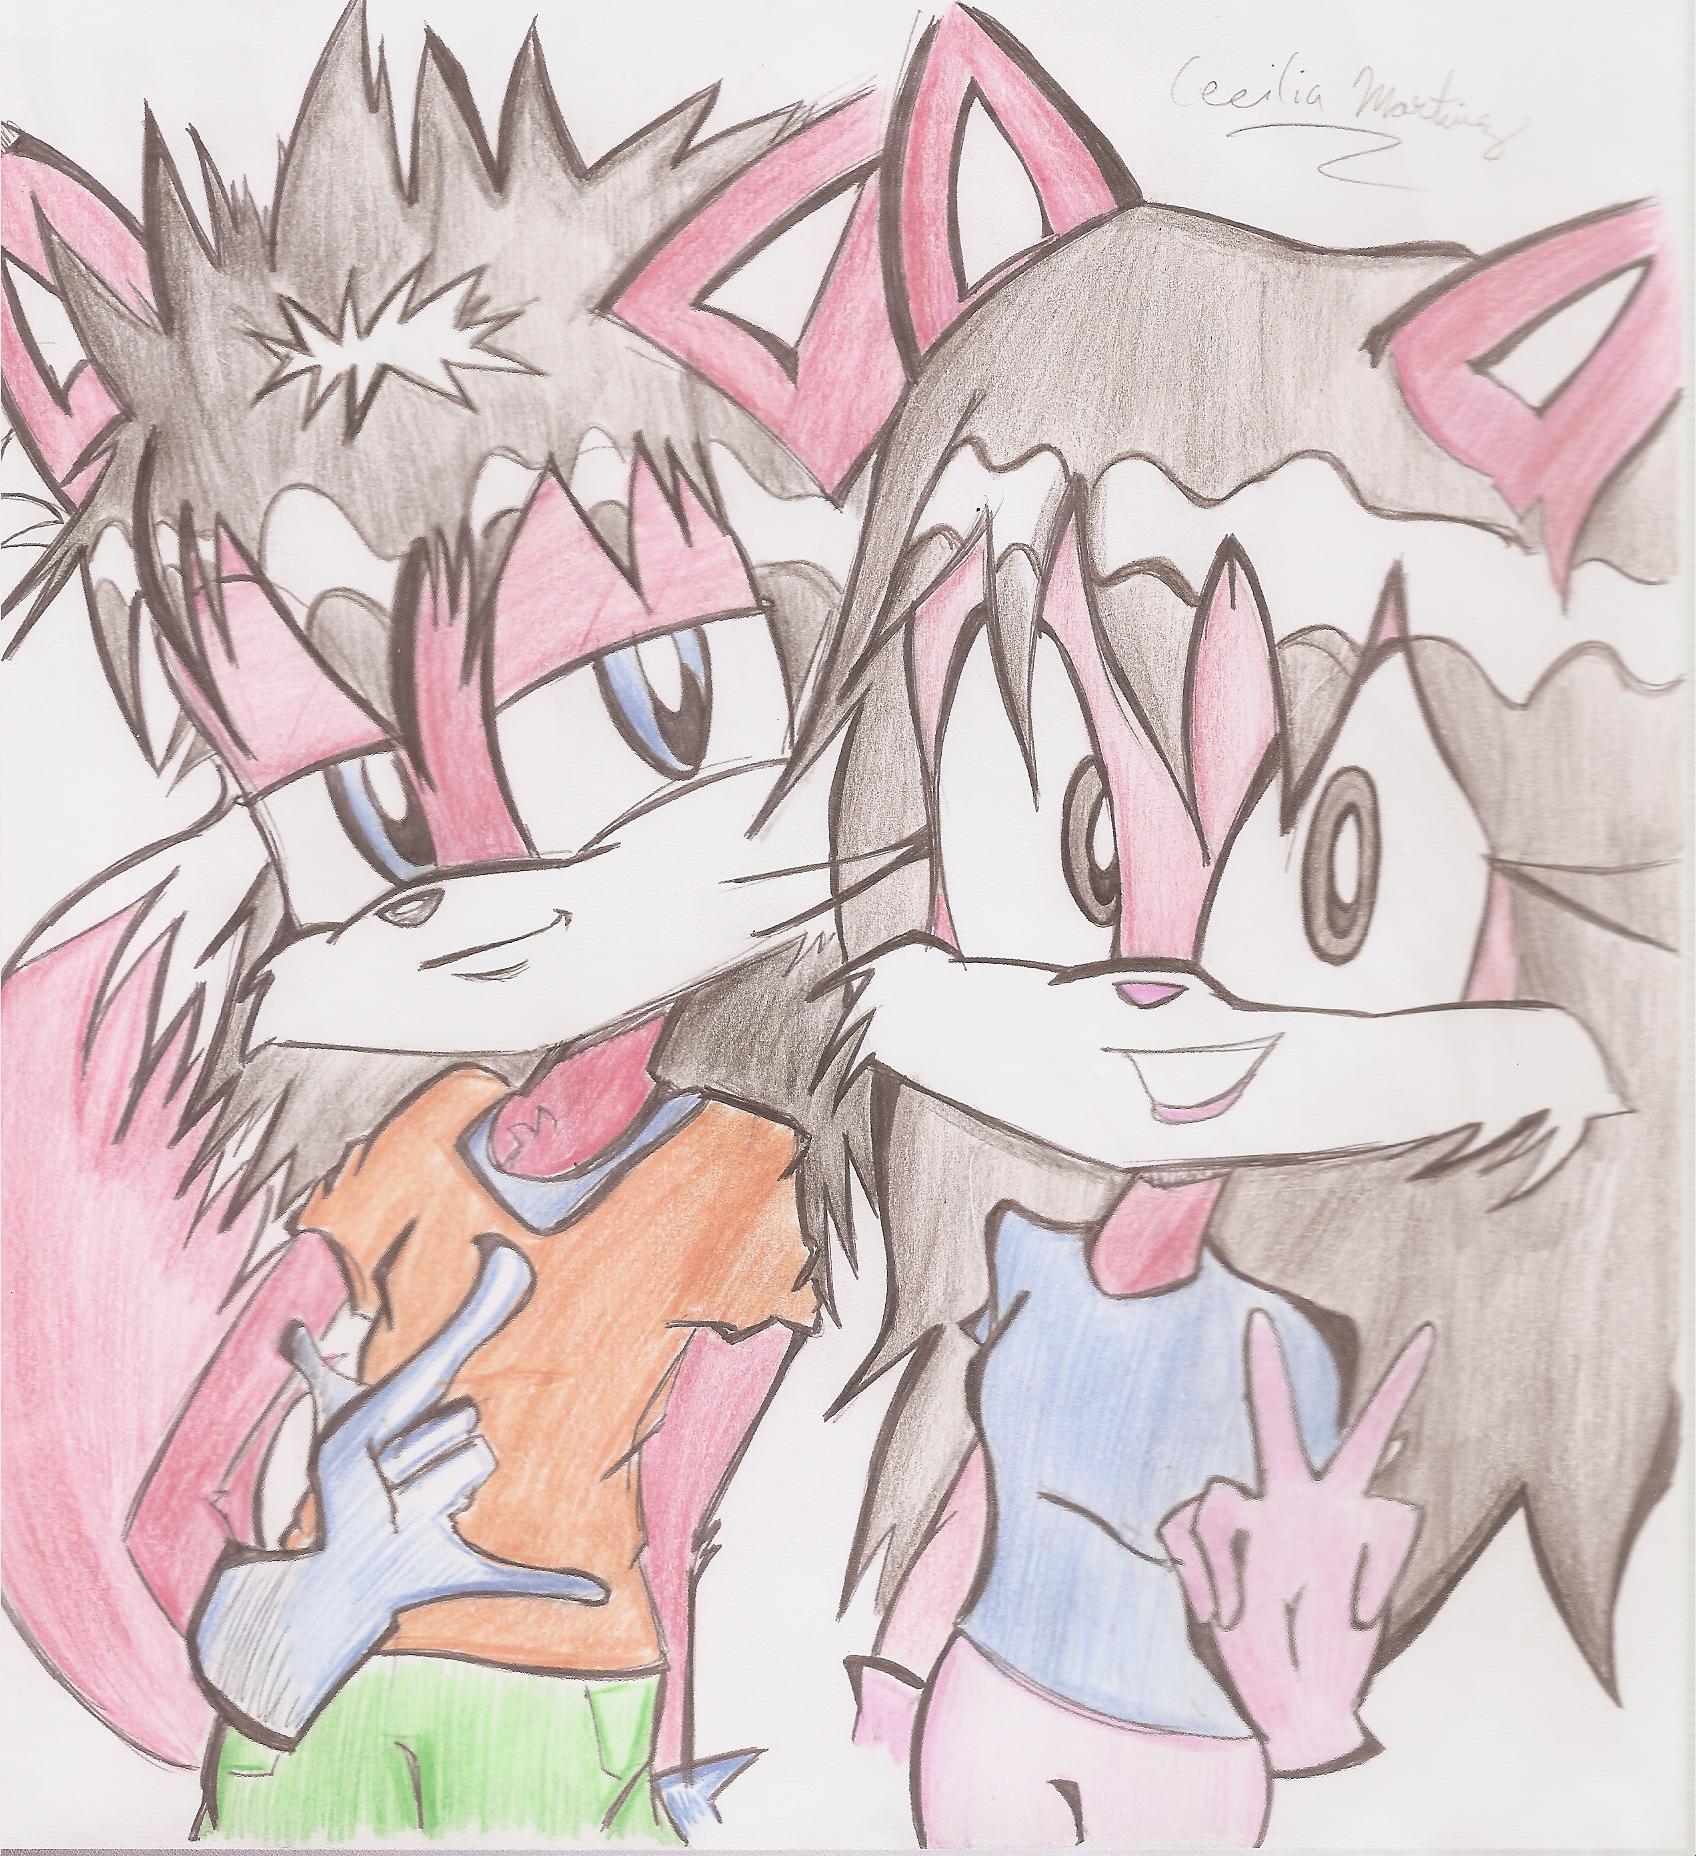 Jaide and Max-Gift for Jaideanna and Max2085 by Neopetgirl